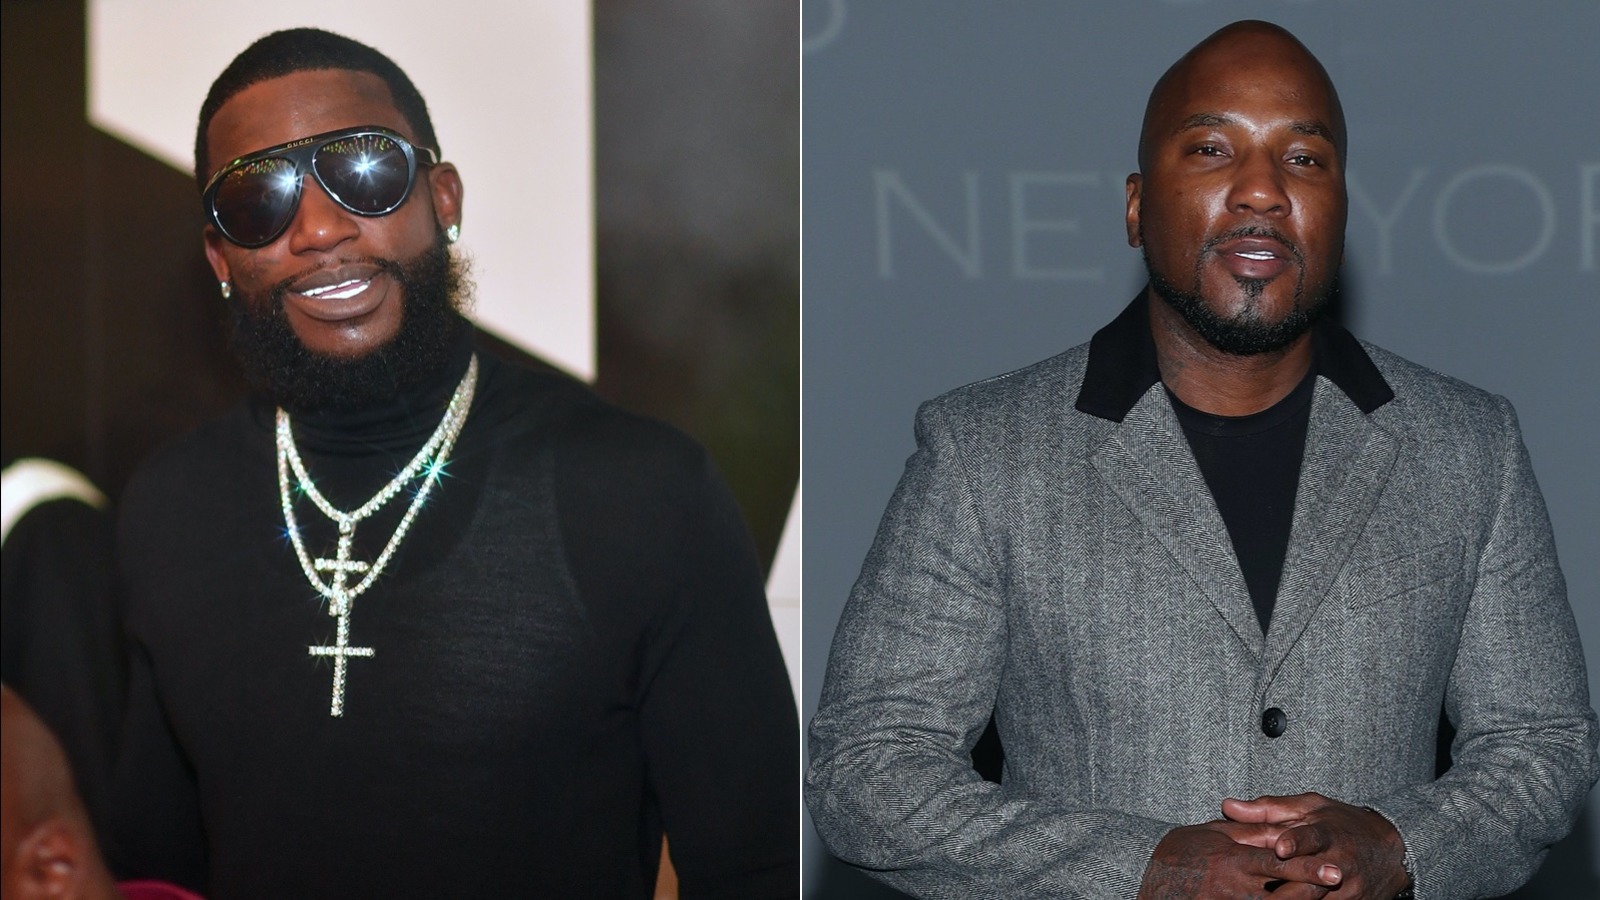 The Truth About Gucci Mane And Jeezy's Beef